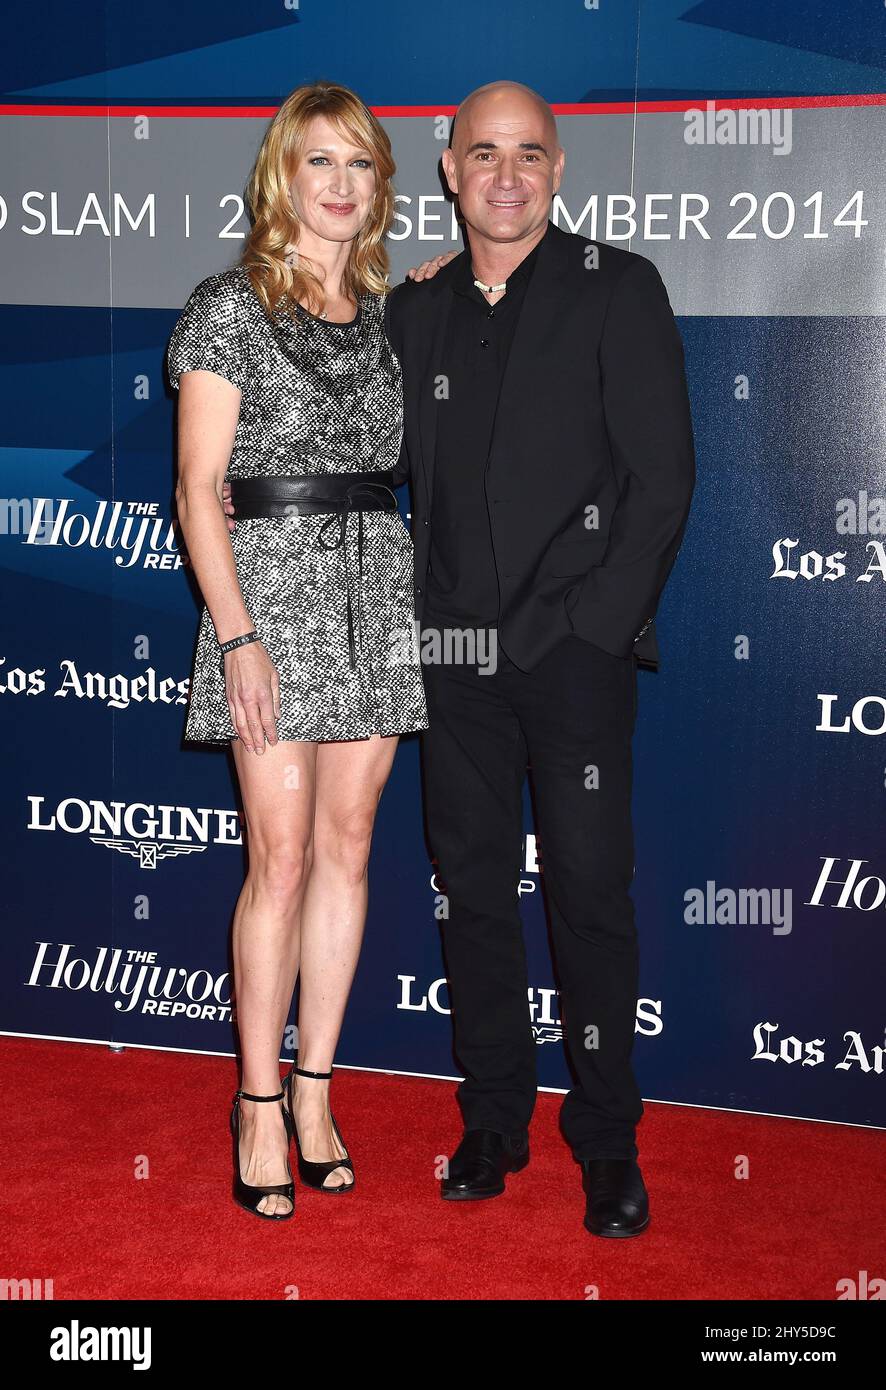 Steffi Graf & Andre Agassi während des Longines Los Angeles Masters Charity  Pro-am im Los Angeles Convention Center Stockfotografie - Alamy